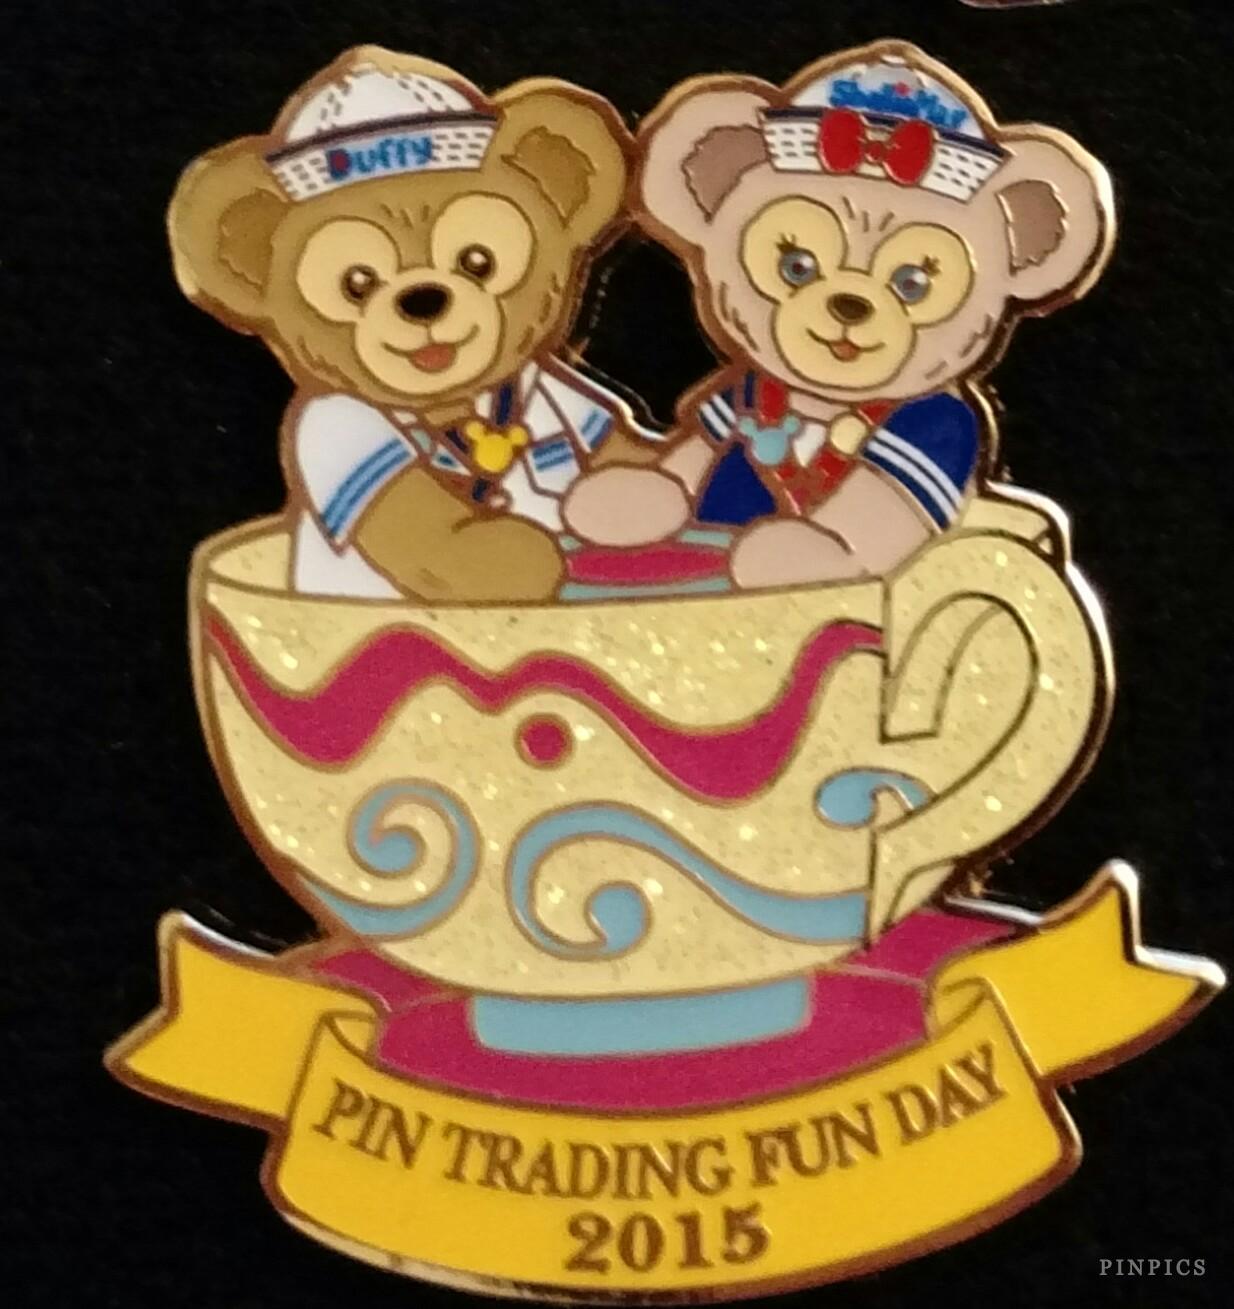 HKDL - Pin Trading Fun Days 2015 - Duffy & ShellieMay Mad Hatter Tea Cups